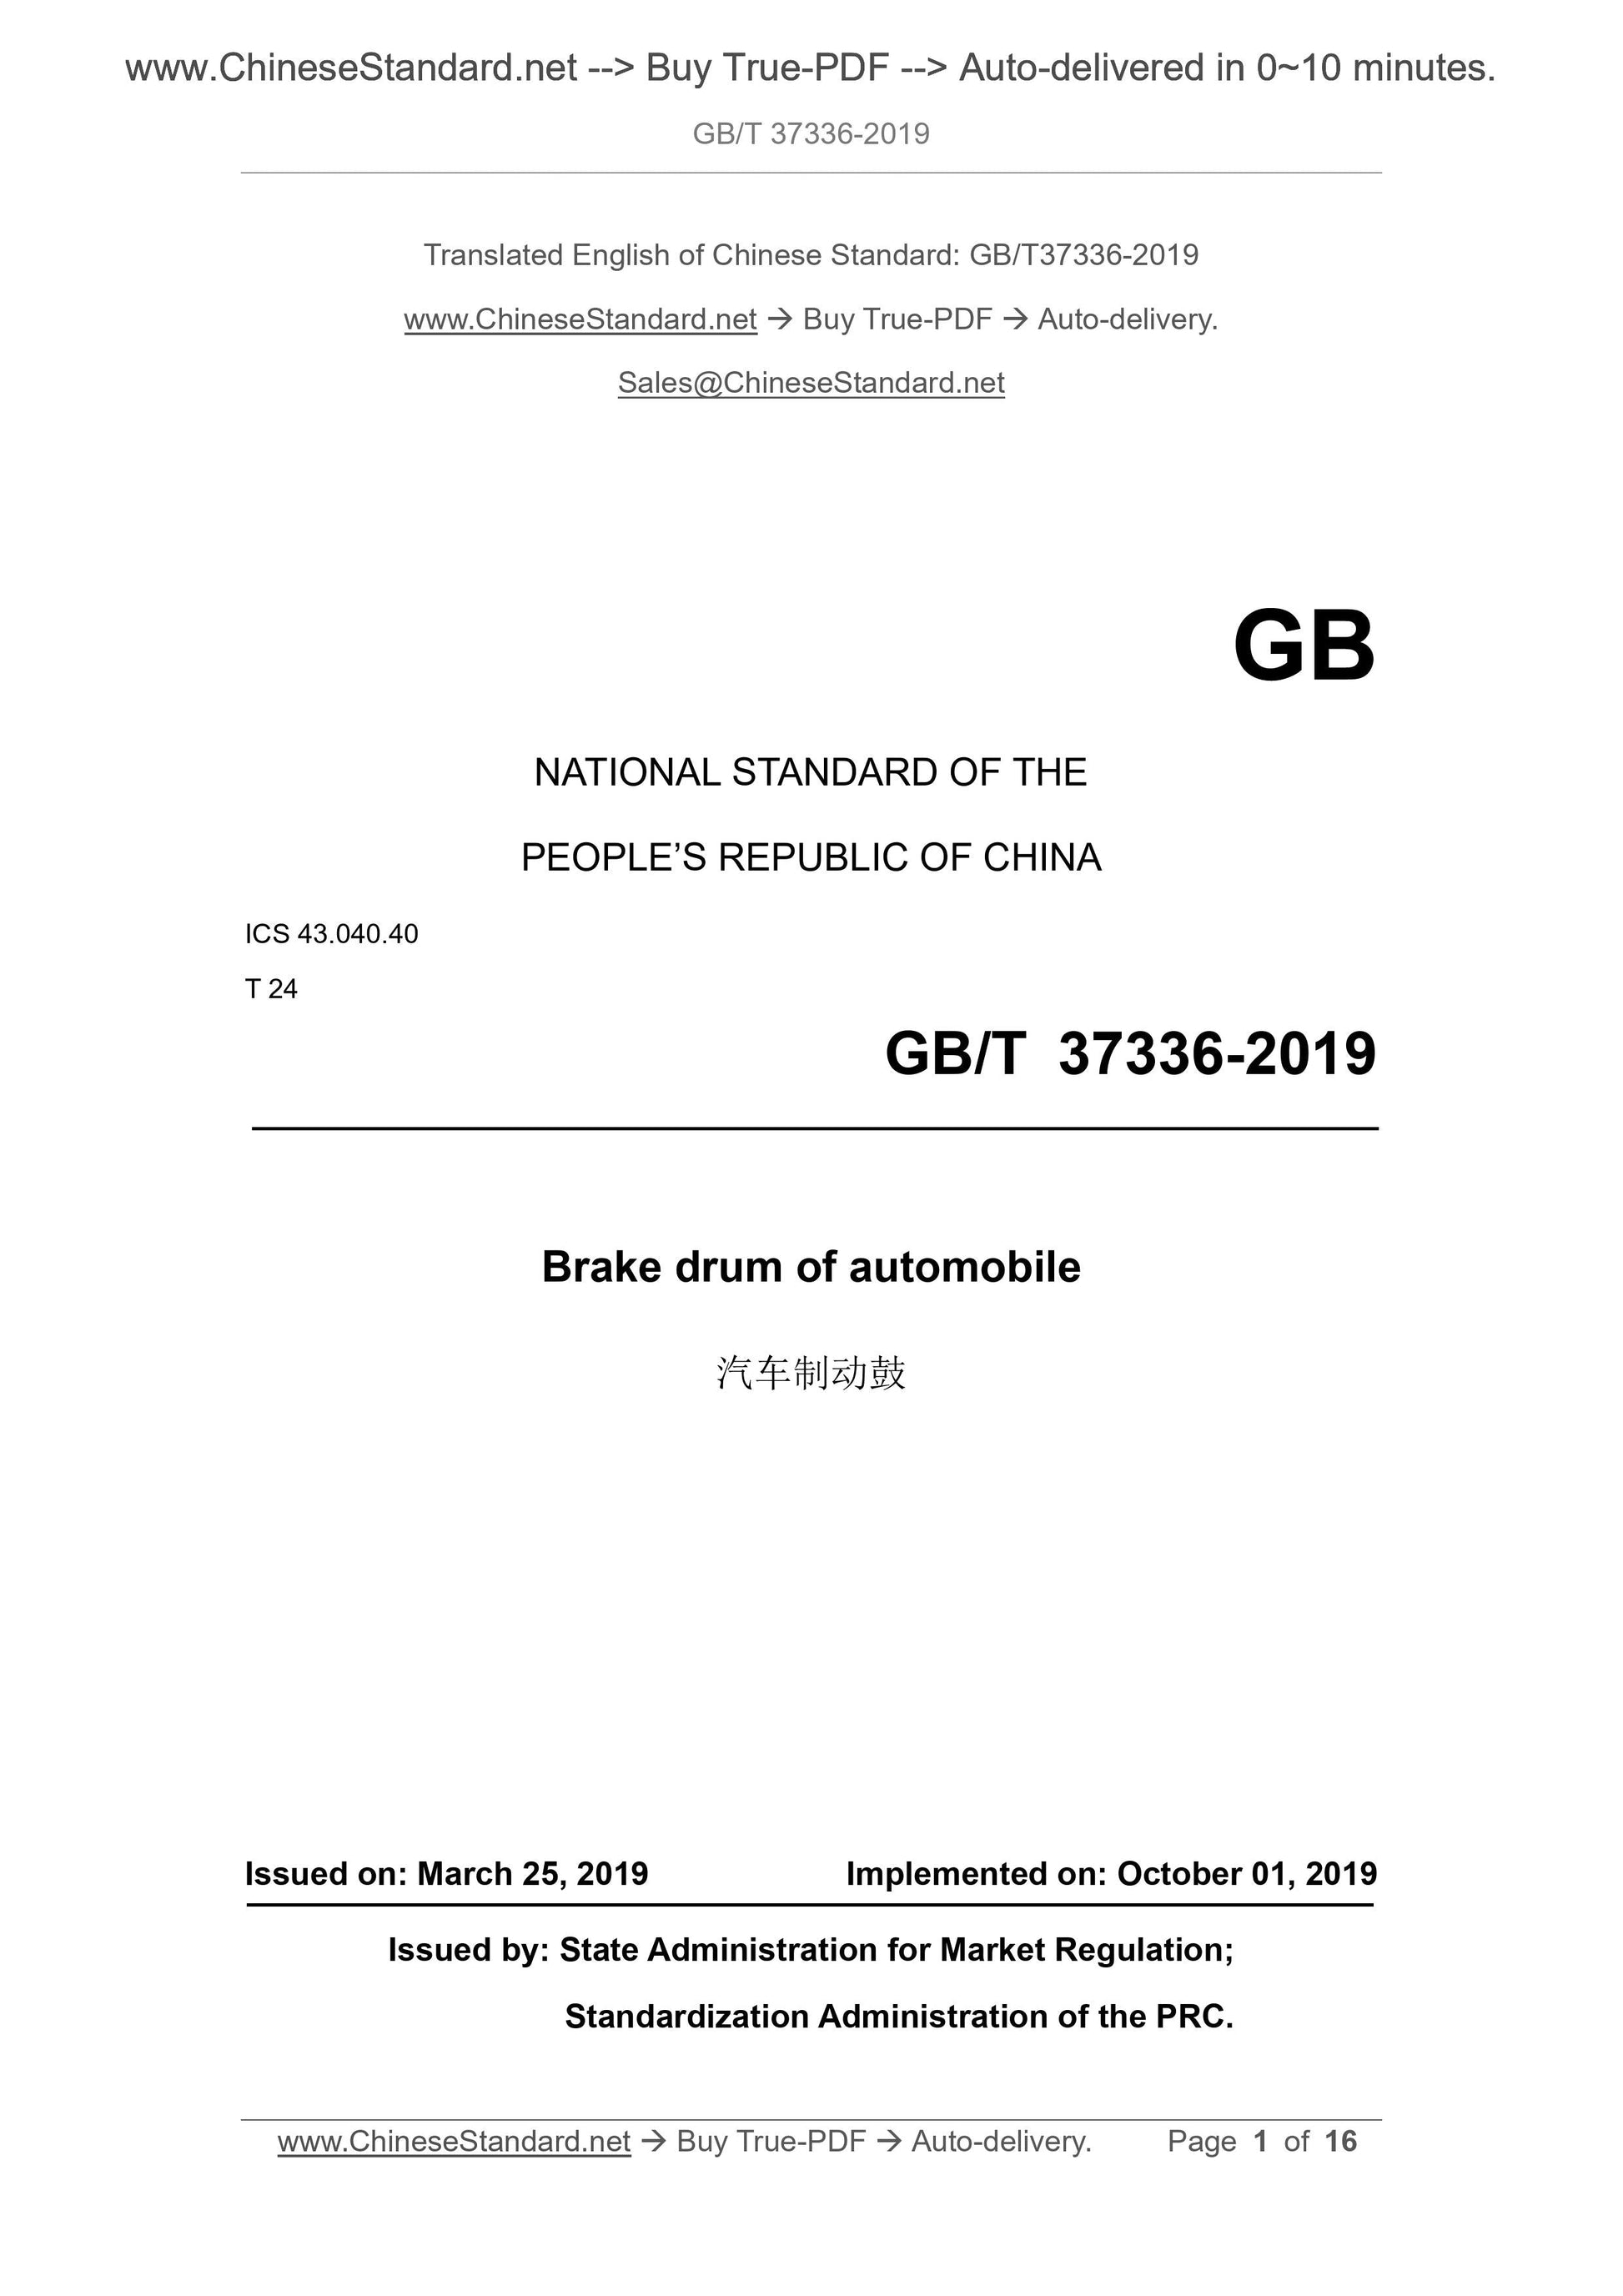 GB/T 37336-2019 Page 1